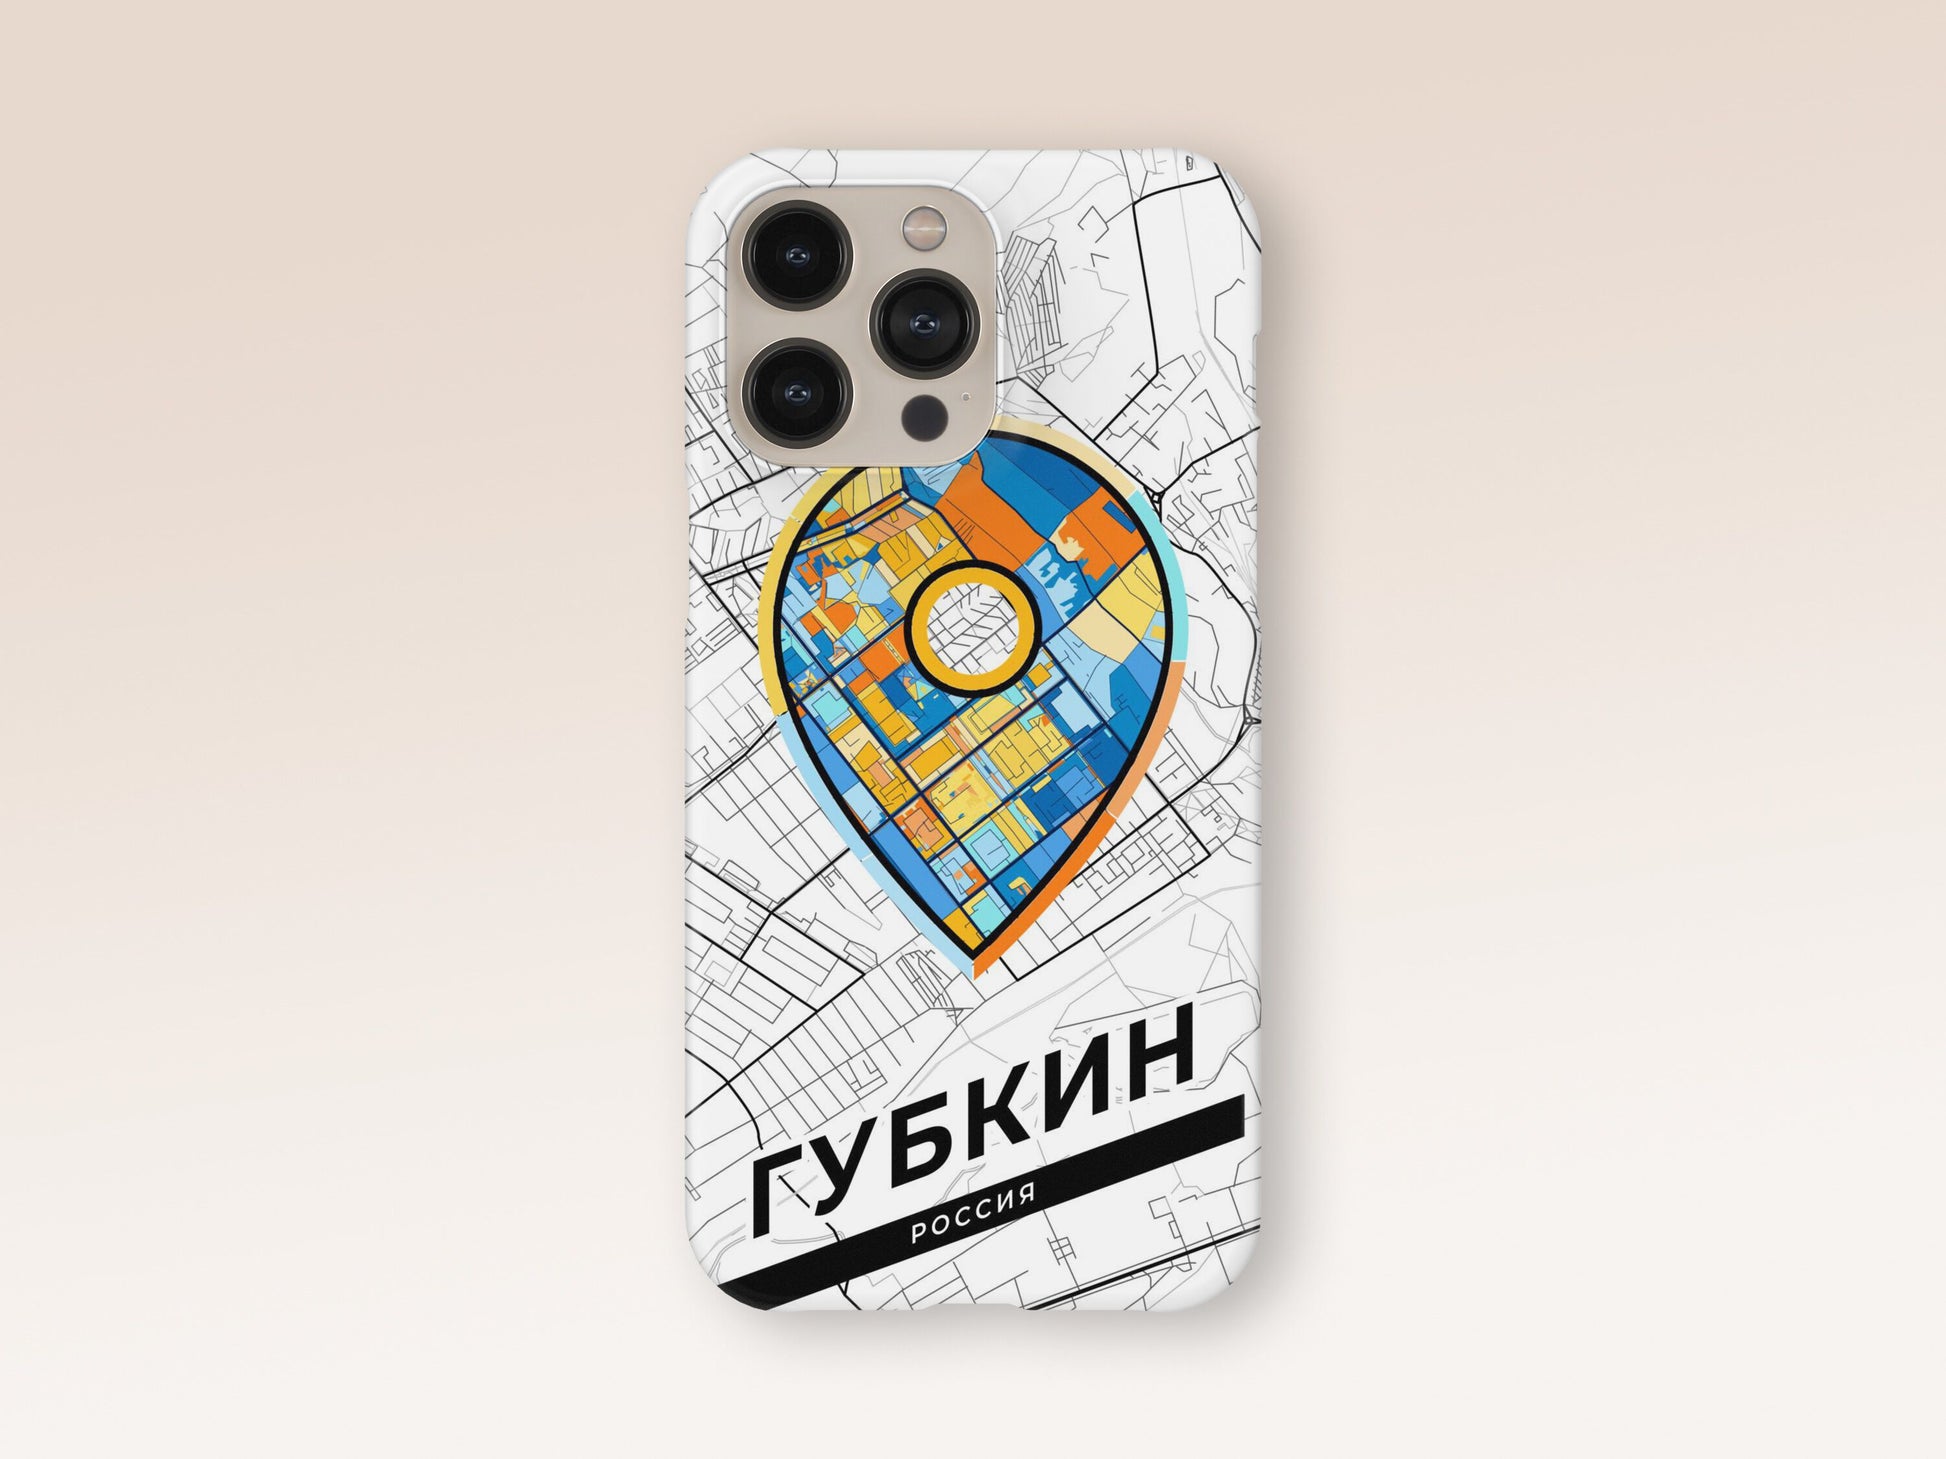 Gubkin Russia slim phone case with colorful icon. Birthday, wedding or housewarming gift. Couple match cases. 1